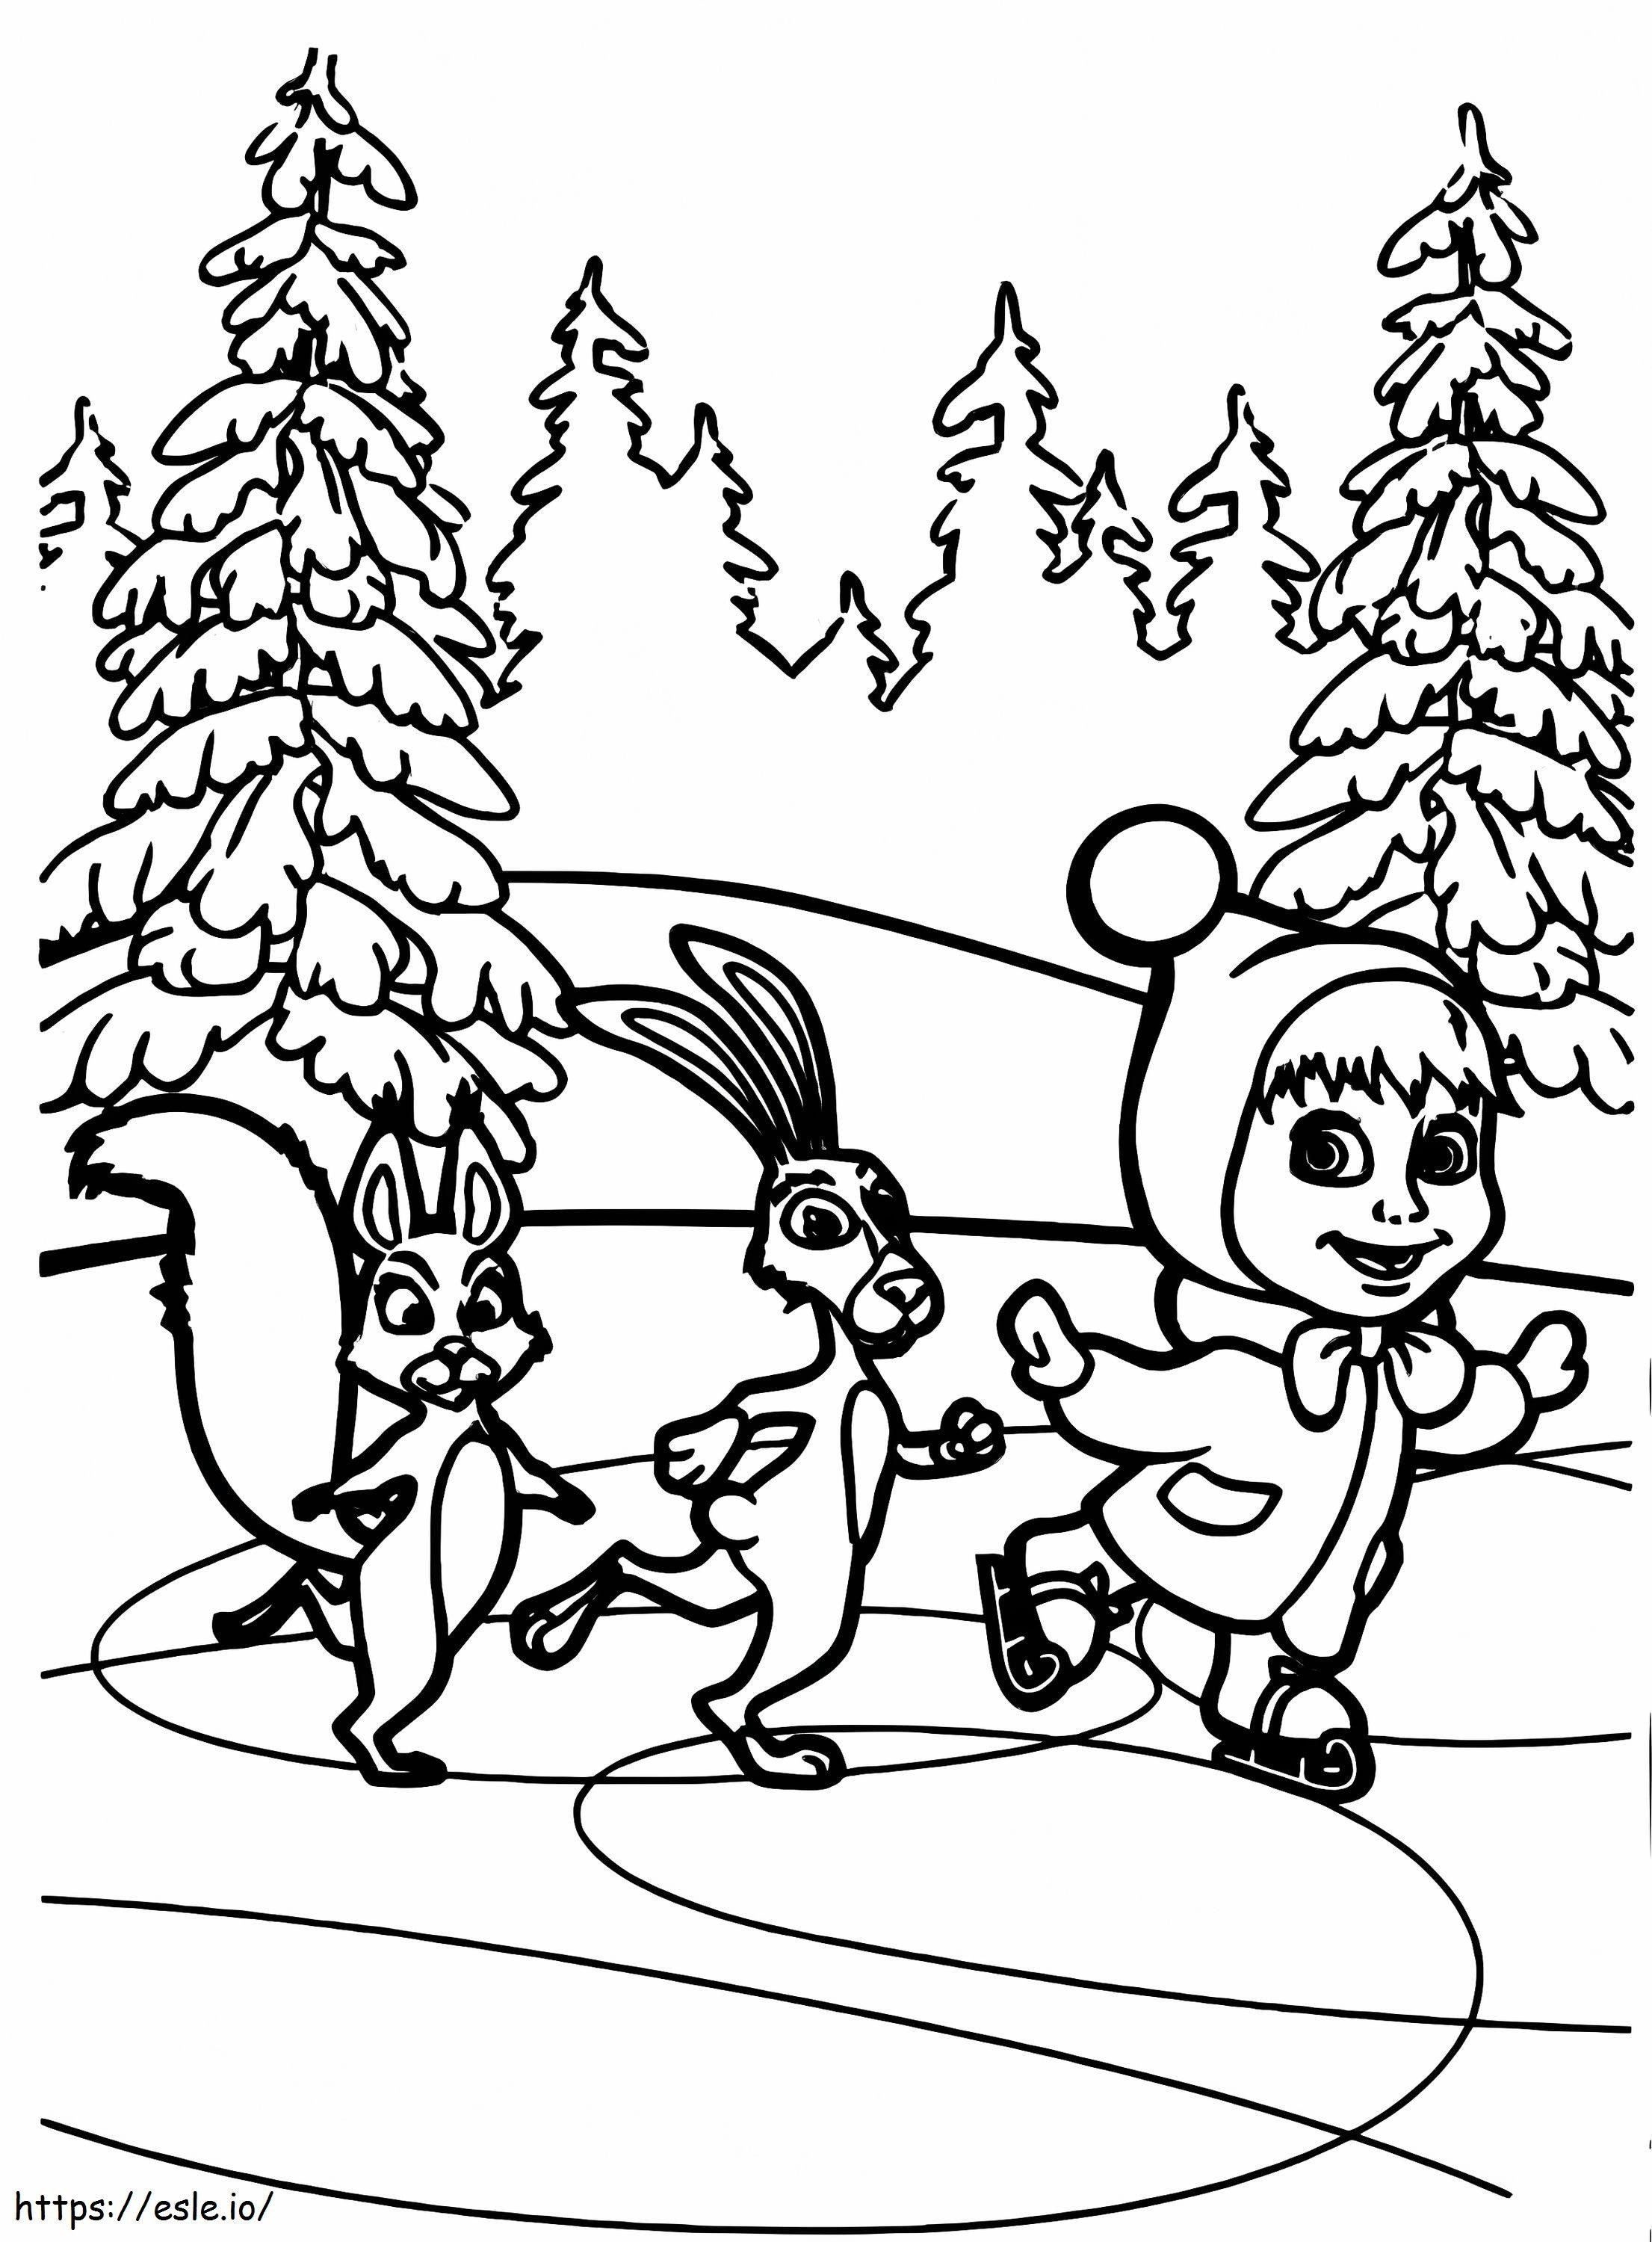 Masha In Christmas coloring page